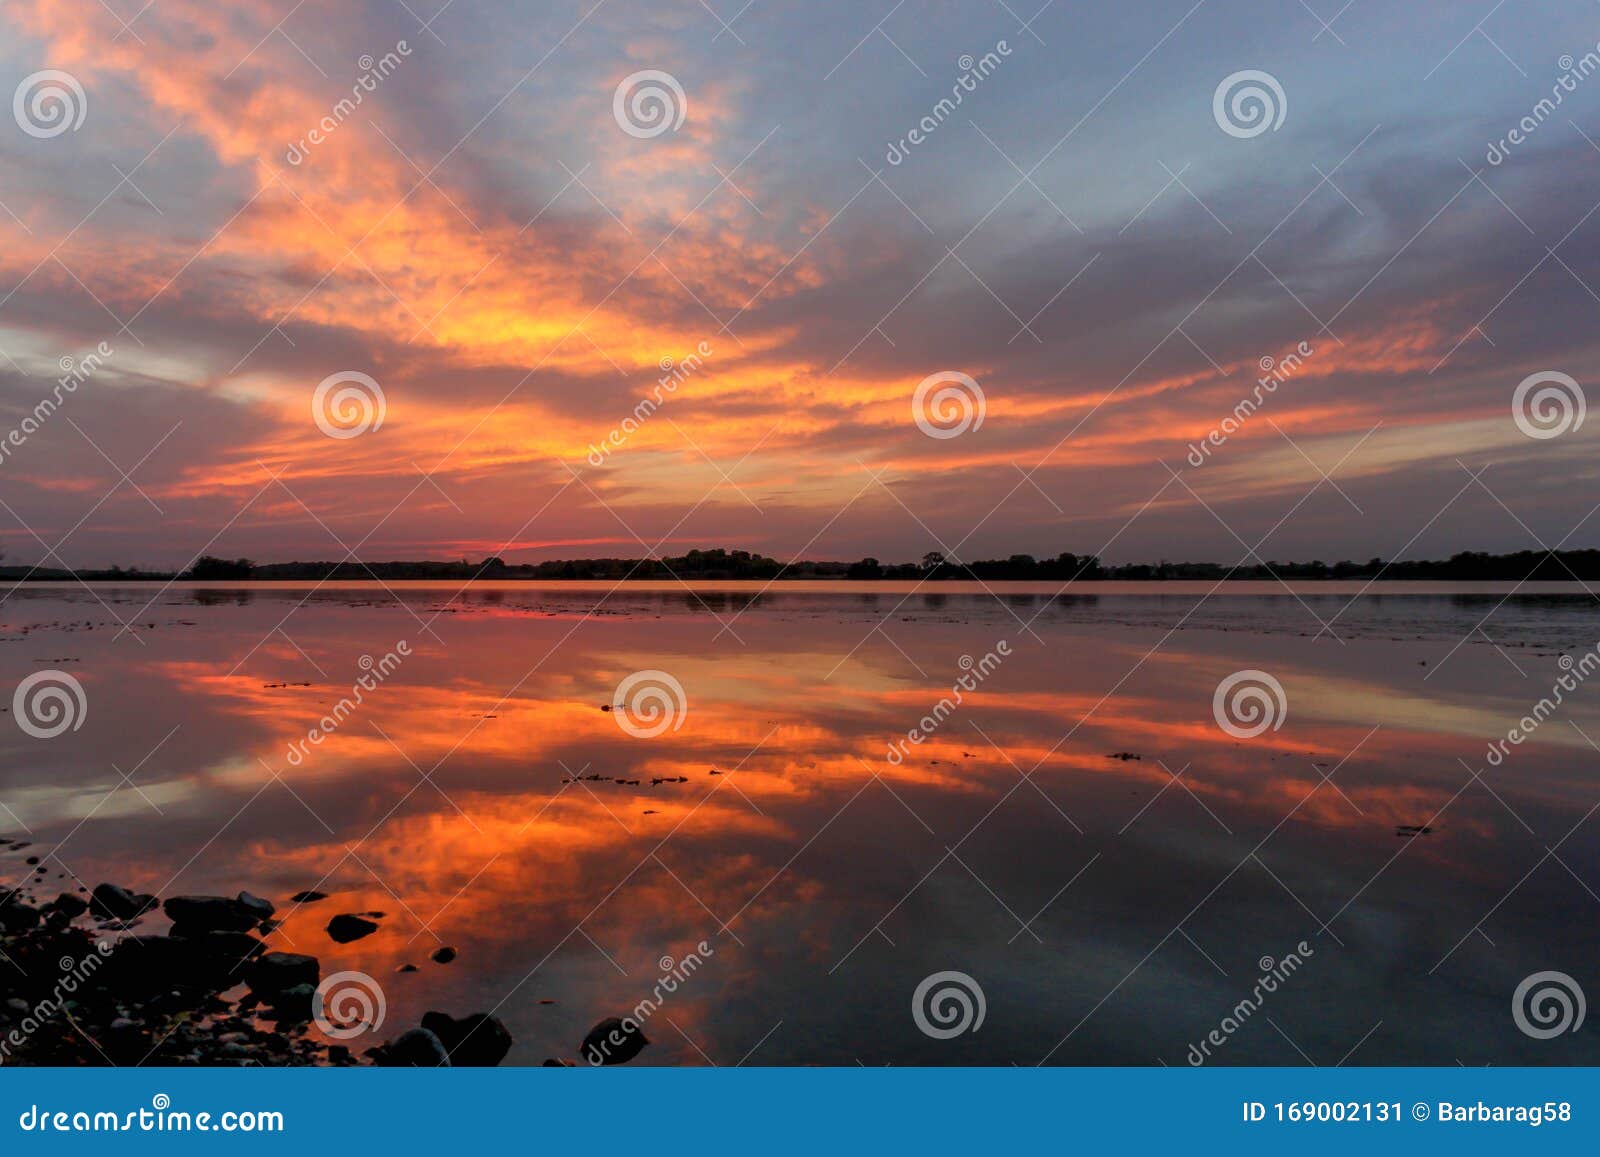 FRENCH: Coucher du Soleil sur Turtle Lake (Sunset on Turtle Lake)